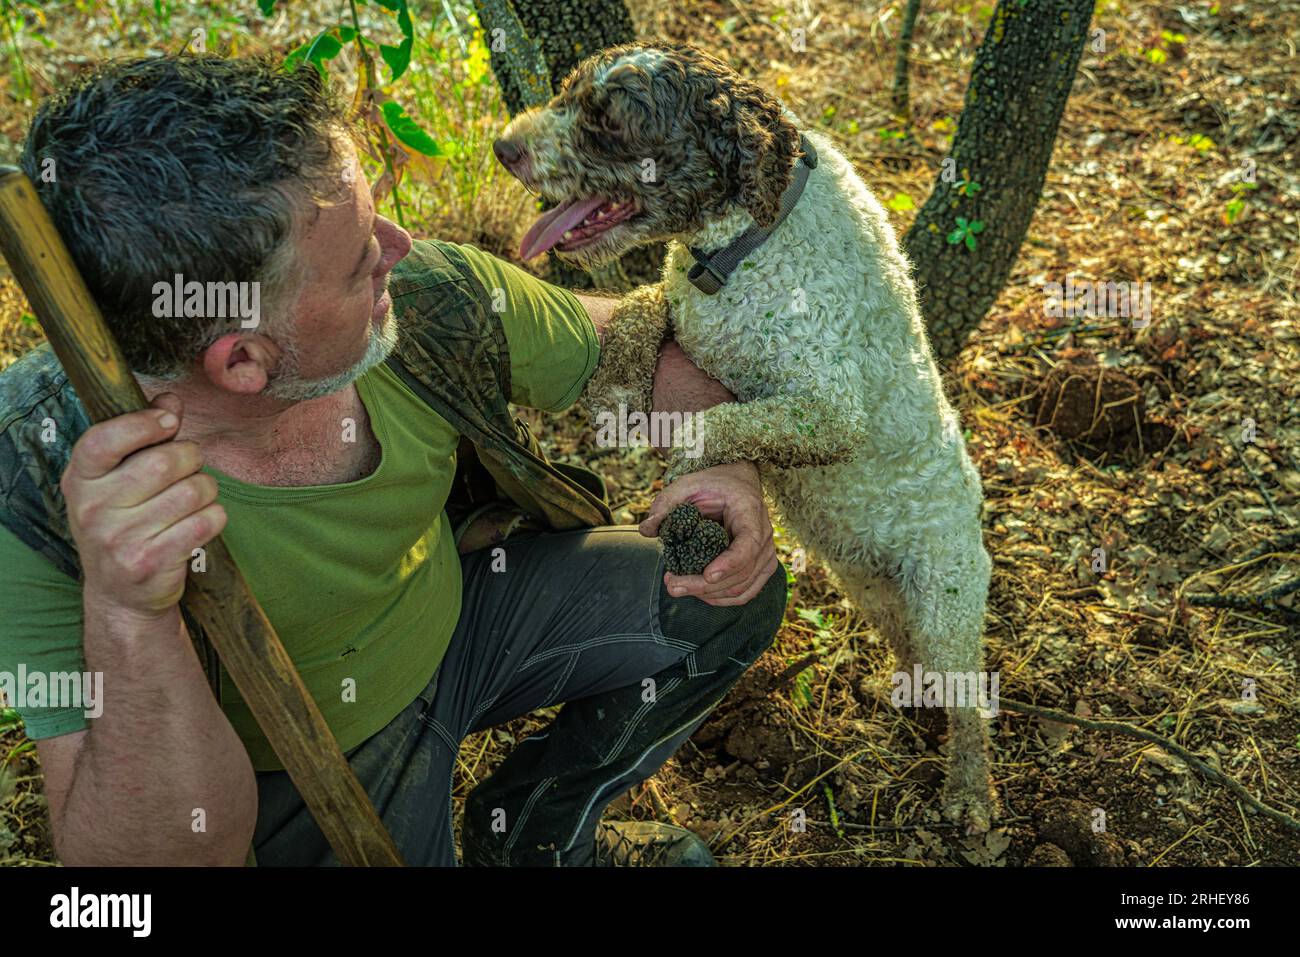 After having found the precious mushroom, the truffle dog, a Lagotto Romagnolo, requests the prize from his master. Abruzzo, Italy, Europe Stock Photo